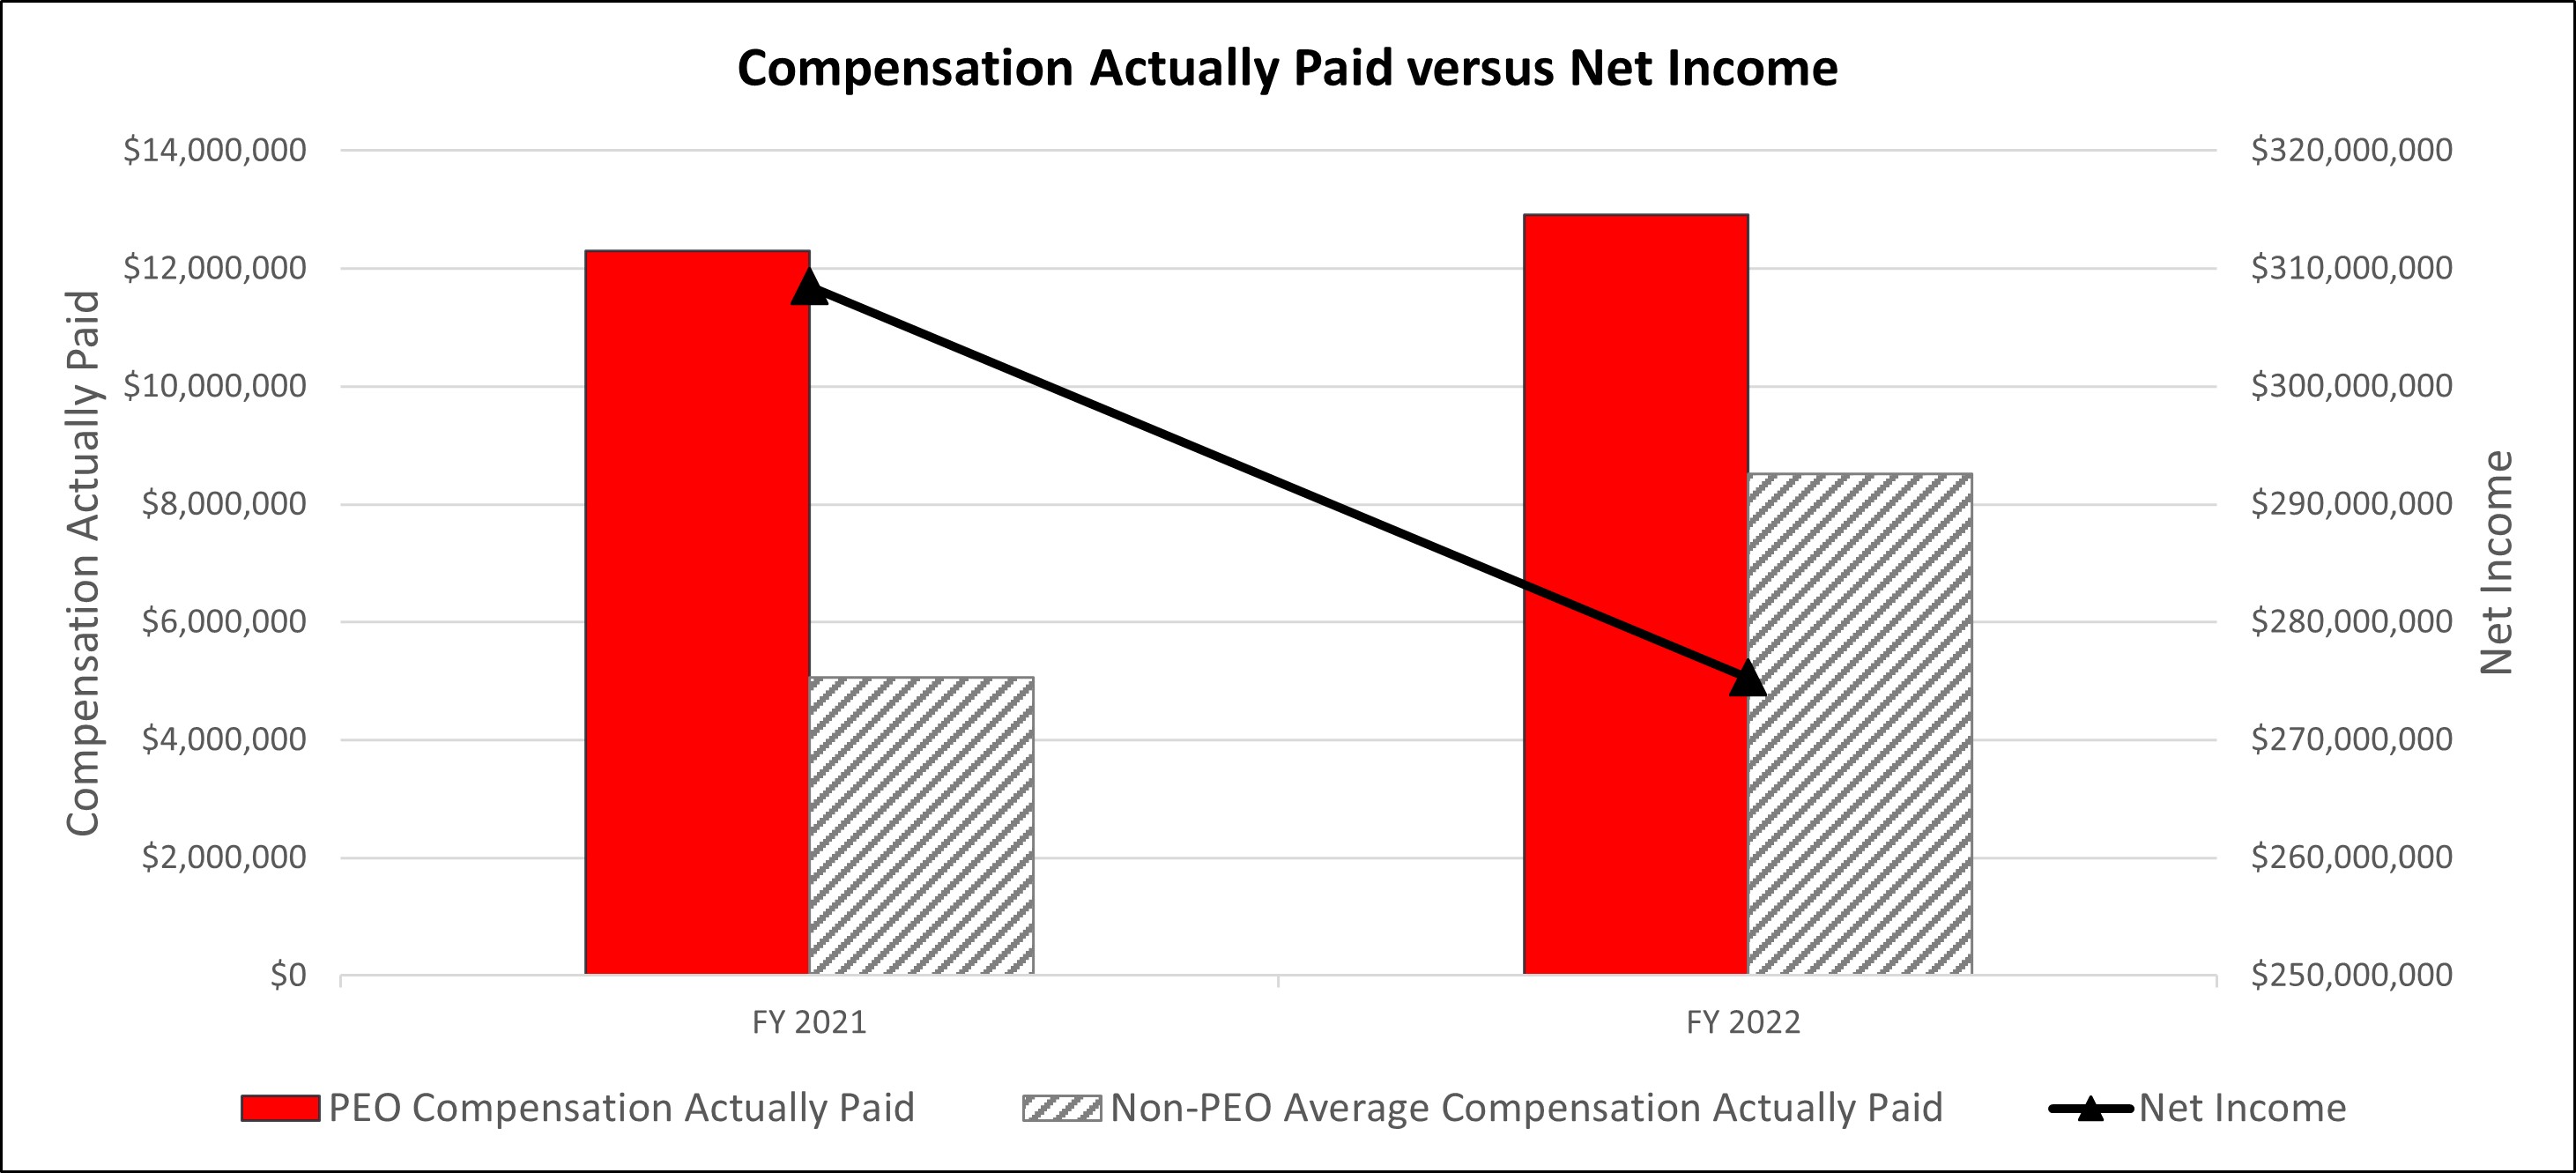 Comp Actually Paid versus Net Income1.jpg